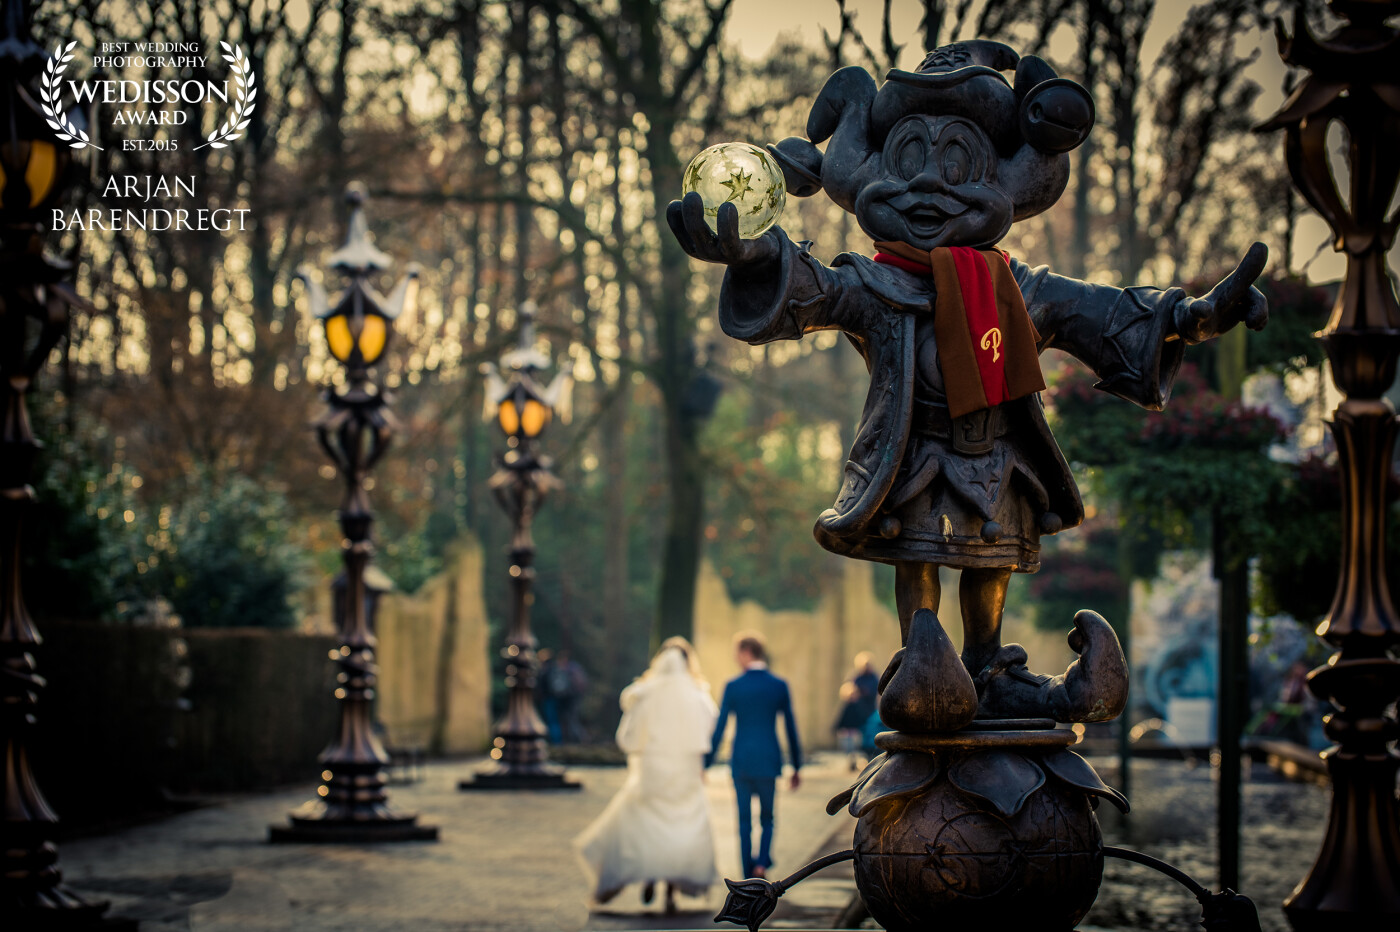 This photo is taken in attraction park De Efteling during their special winter theme.<br />
The bride and groom were walking back to the exit of the park, perfectly in the winter sun.<br />
On the foreground we see the mascot of this park, Pardoes.